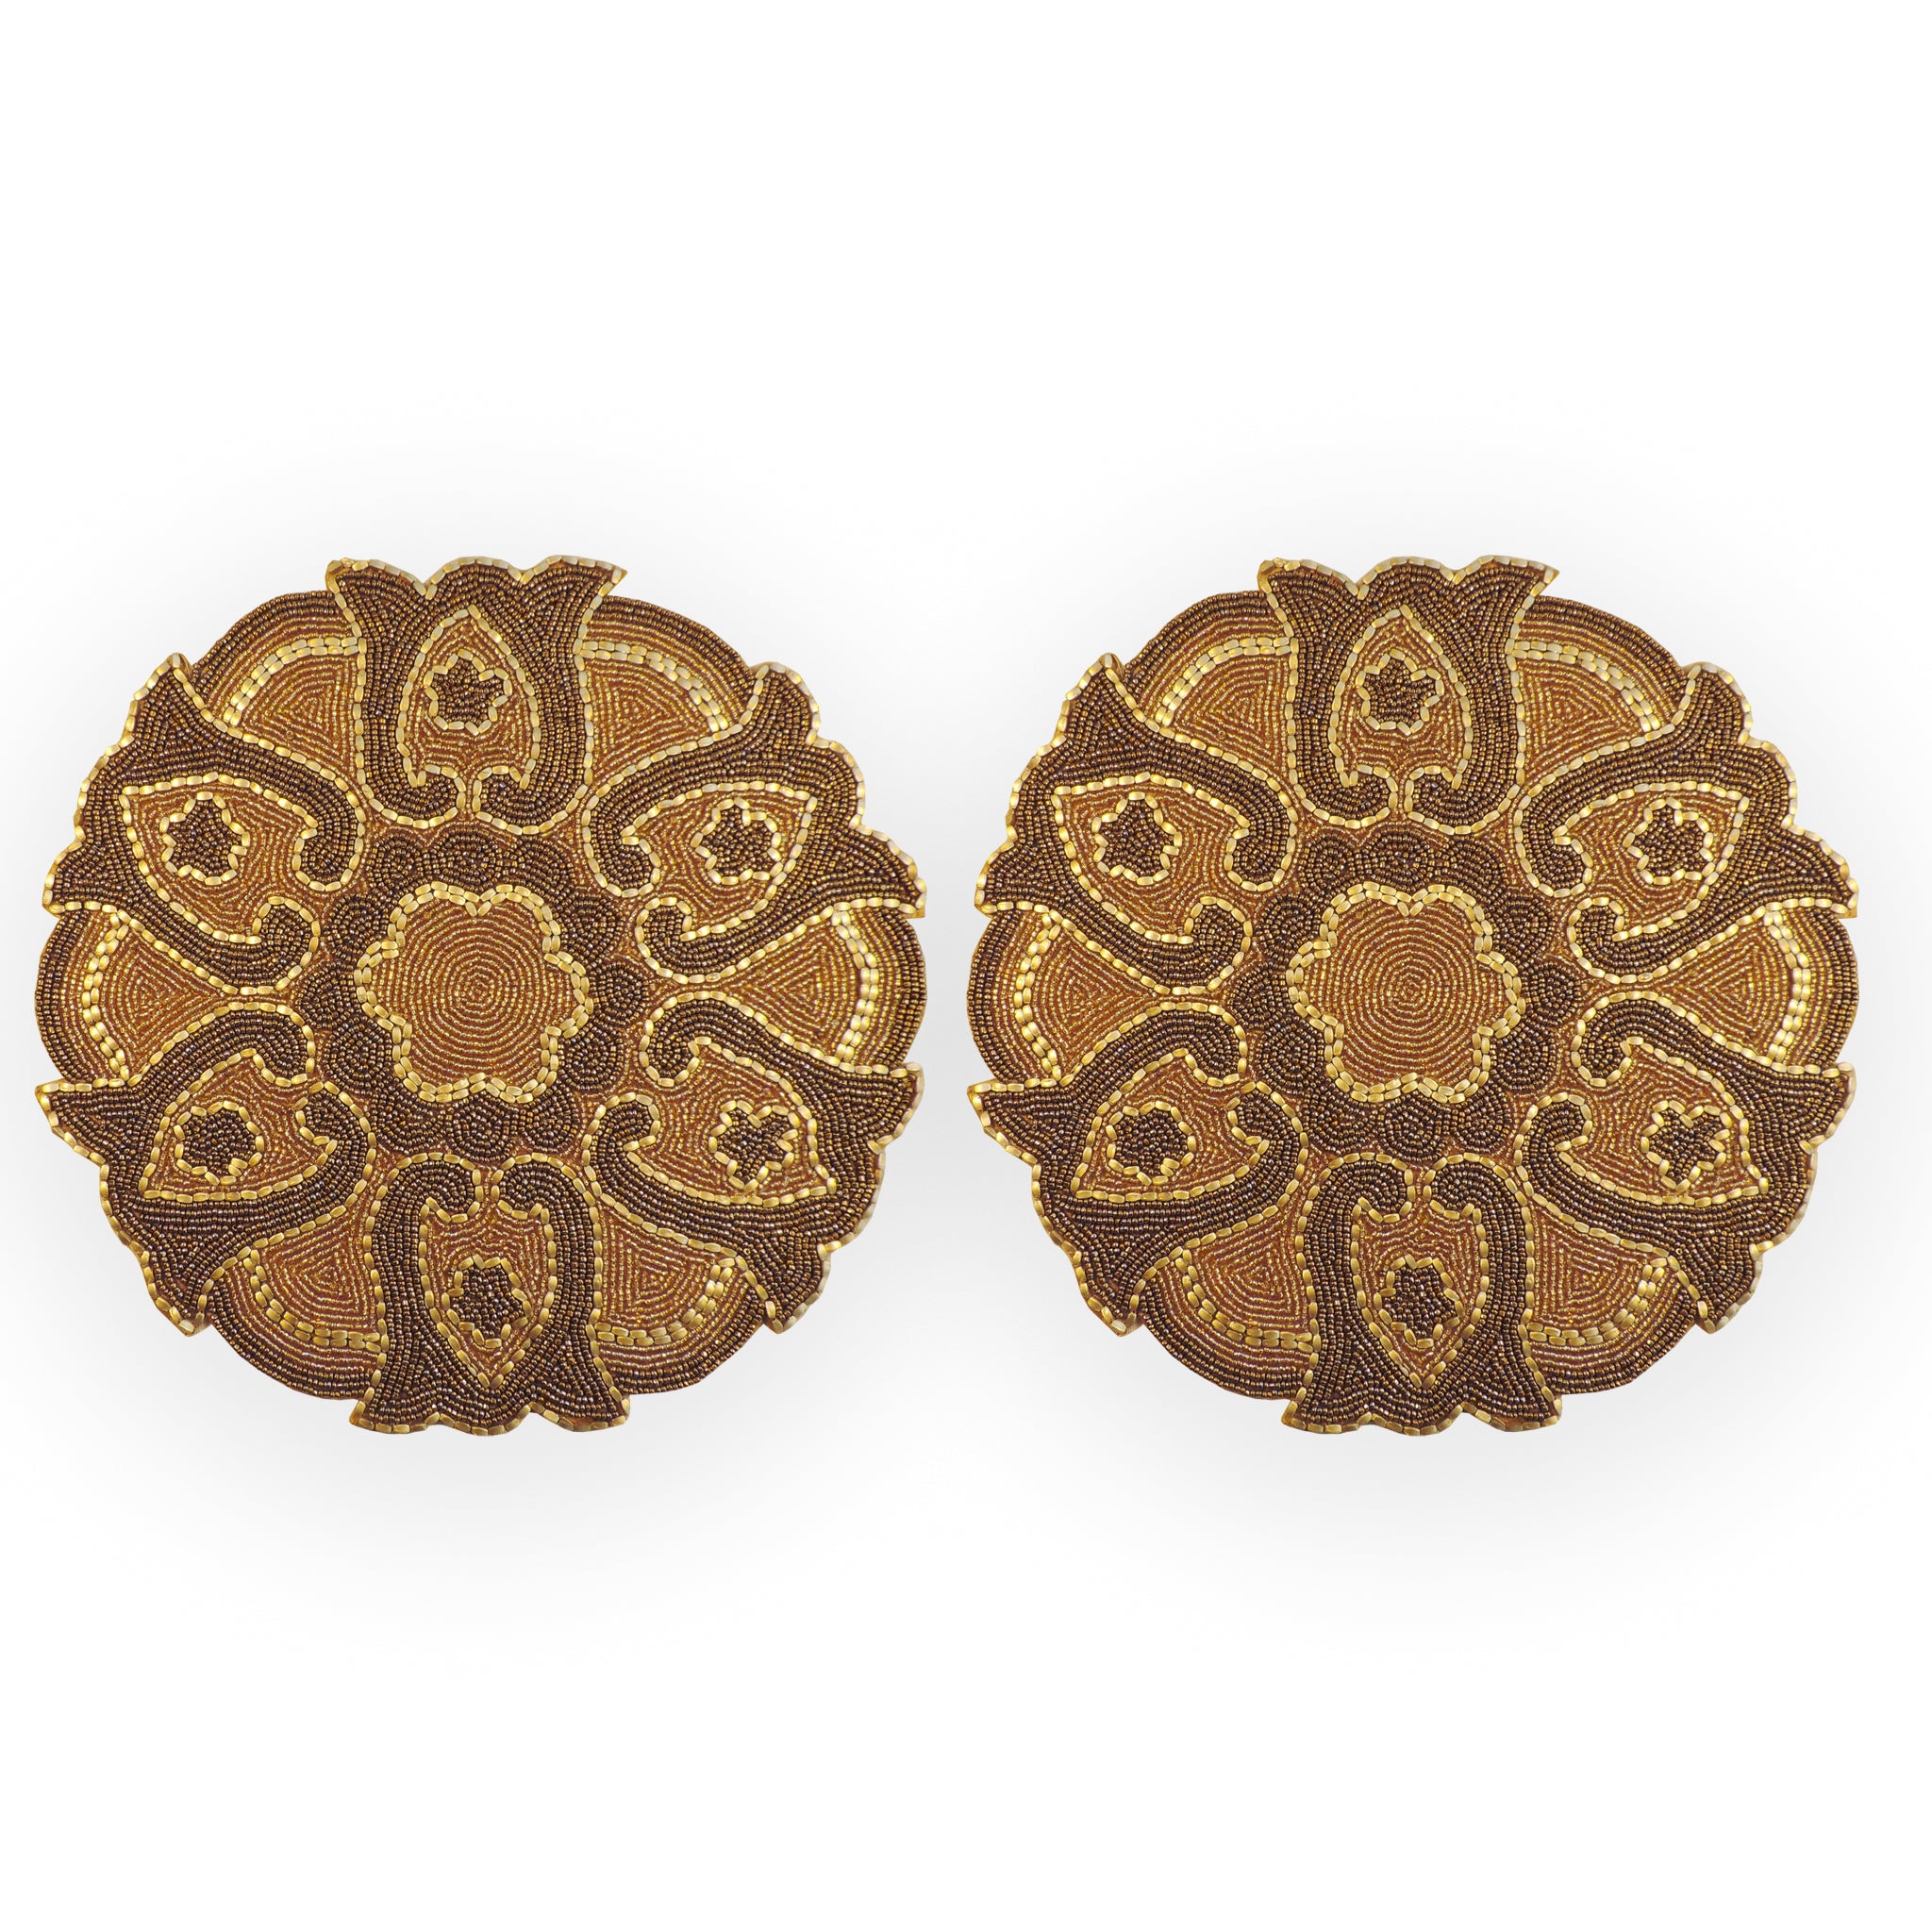 Glass Bead Embroidered Placemats, Chargers / Set of 2 / 14in. Round / Antique Gold